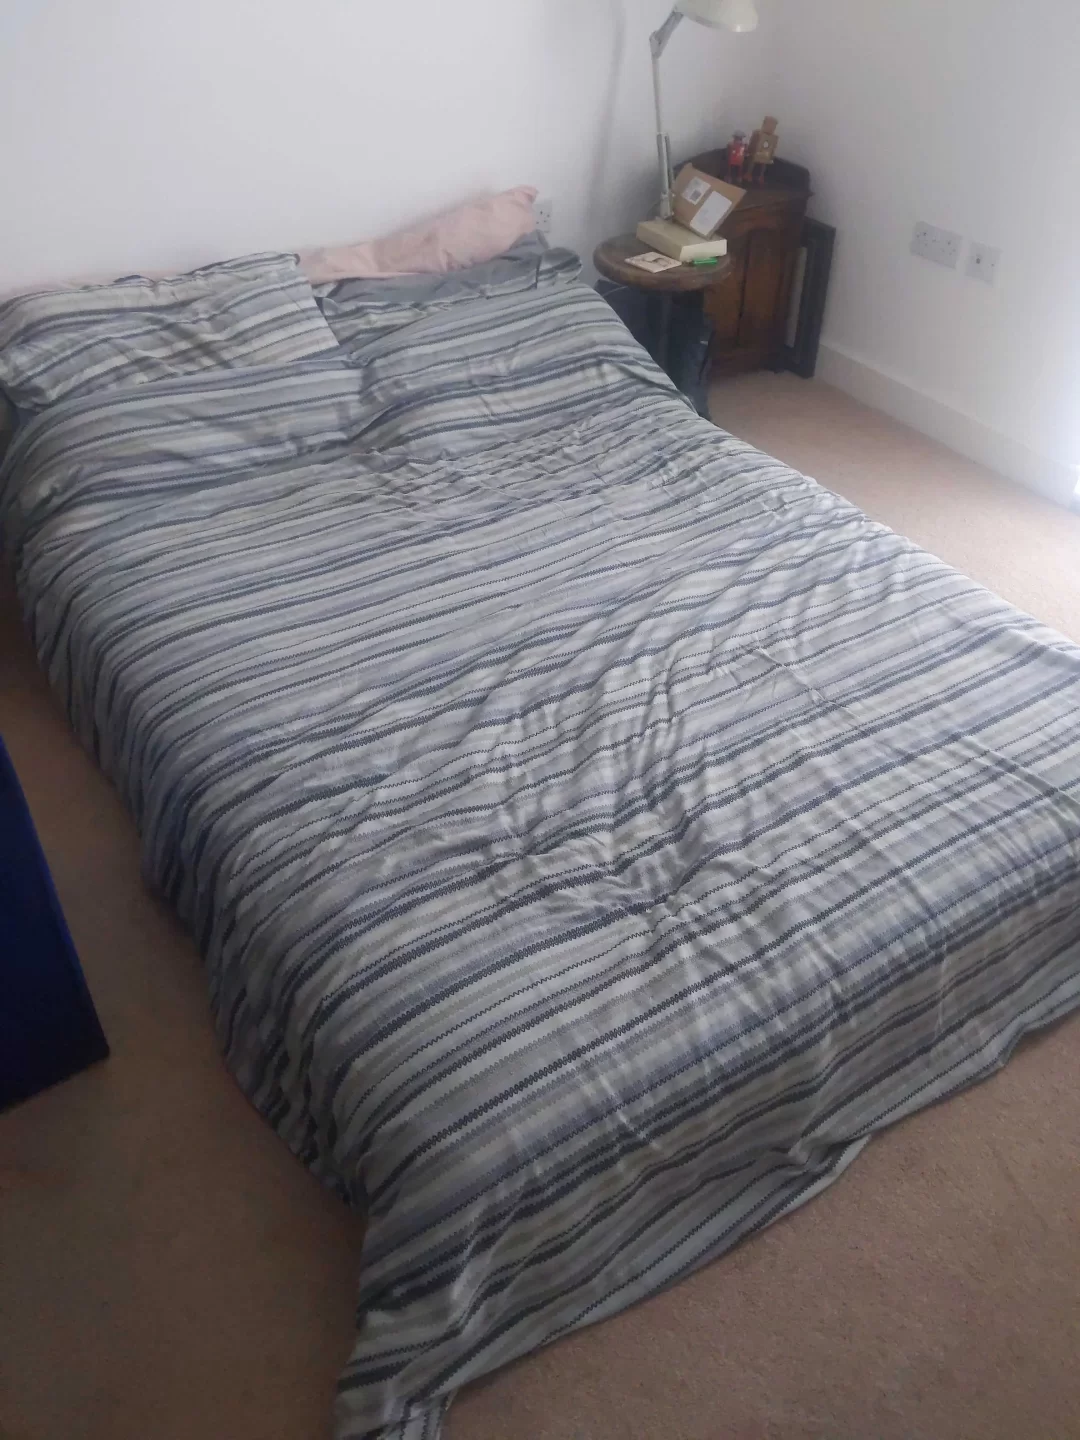 standard double mattress £40 removal charge